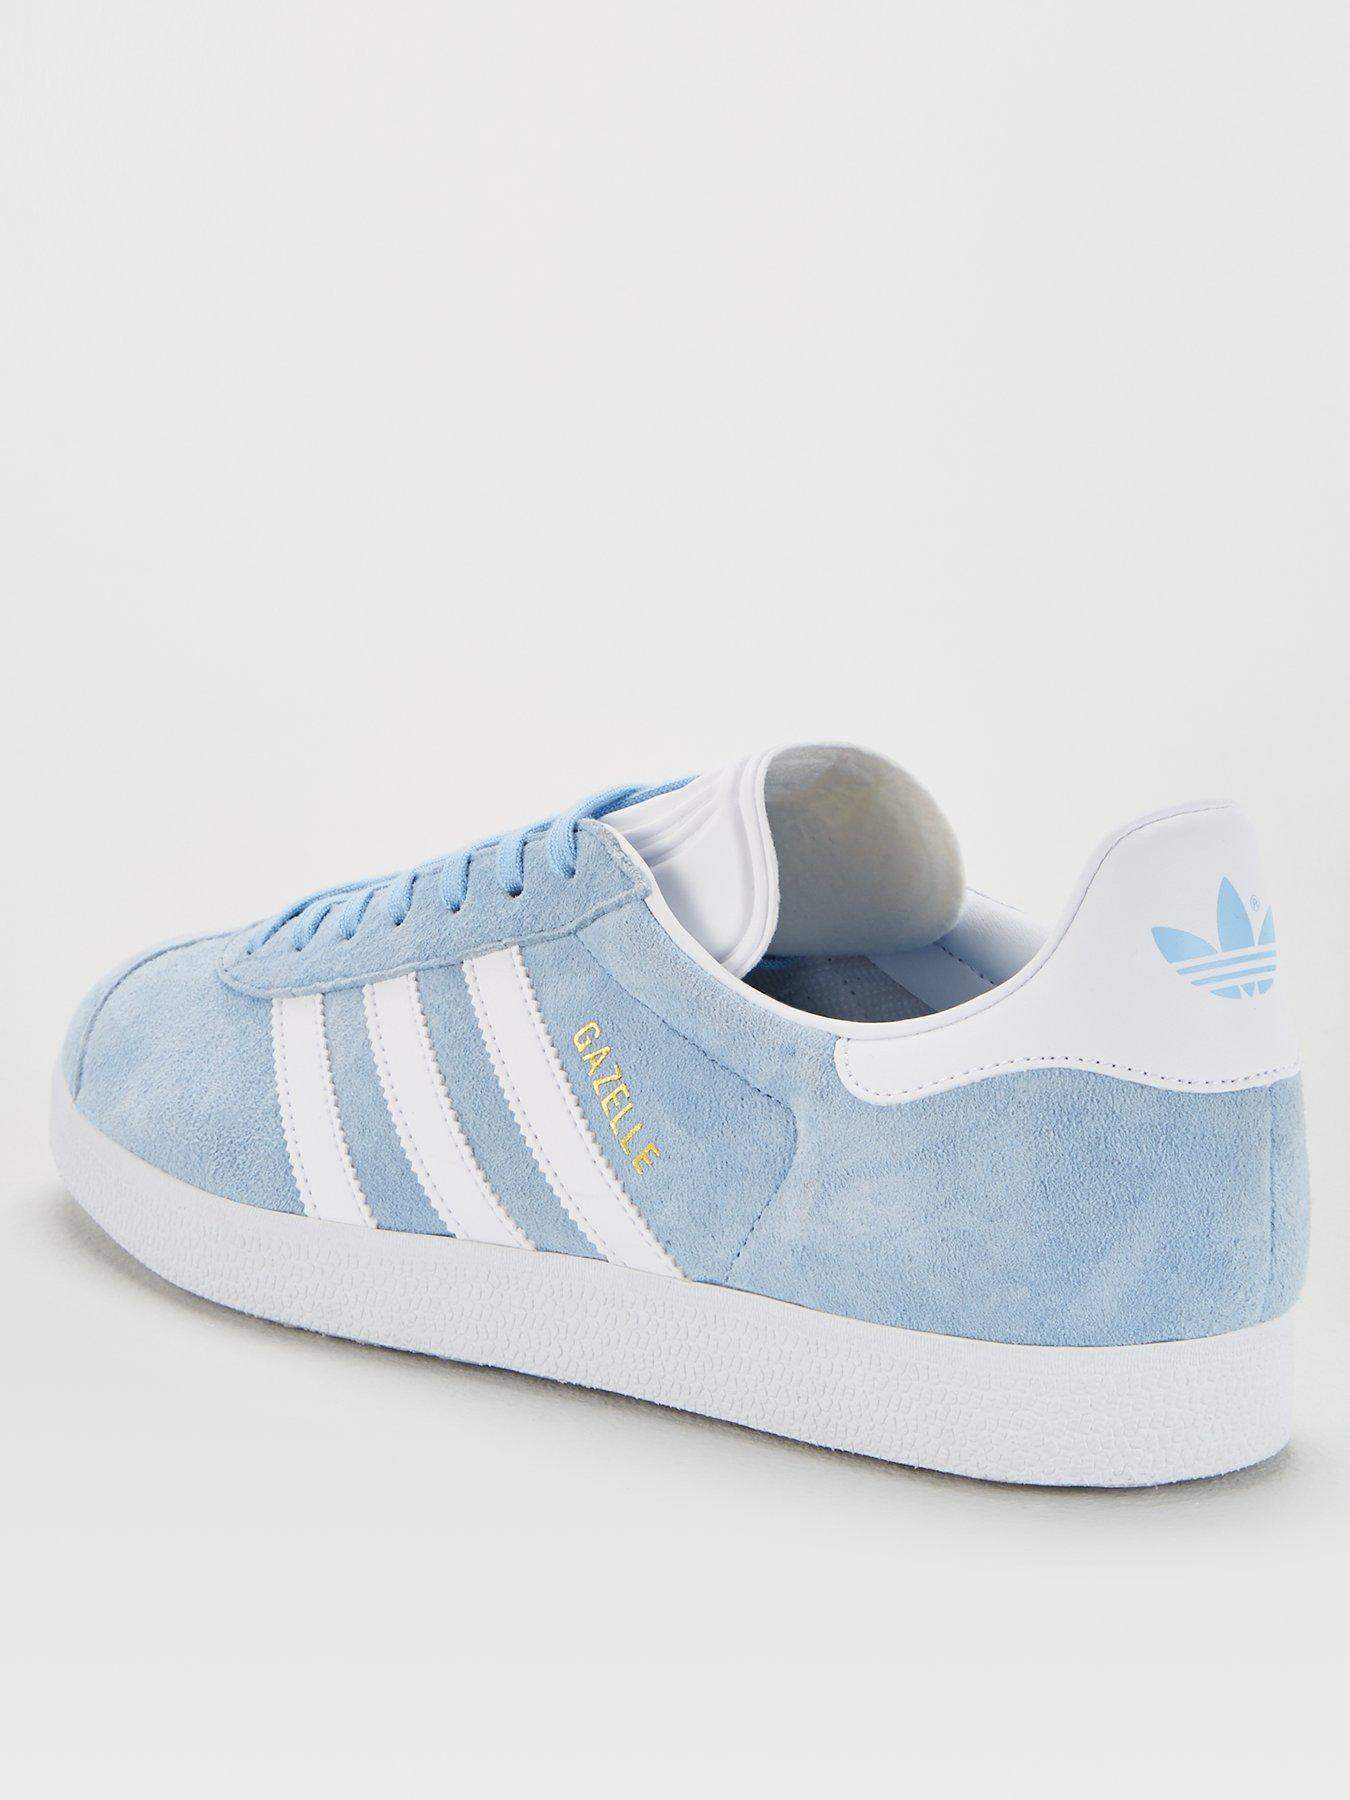 pale blue adidas trainers